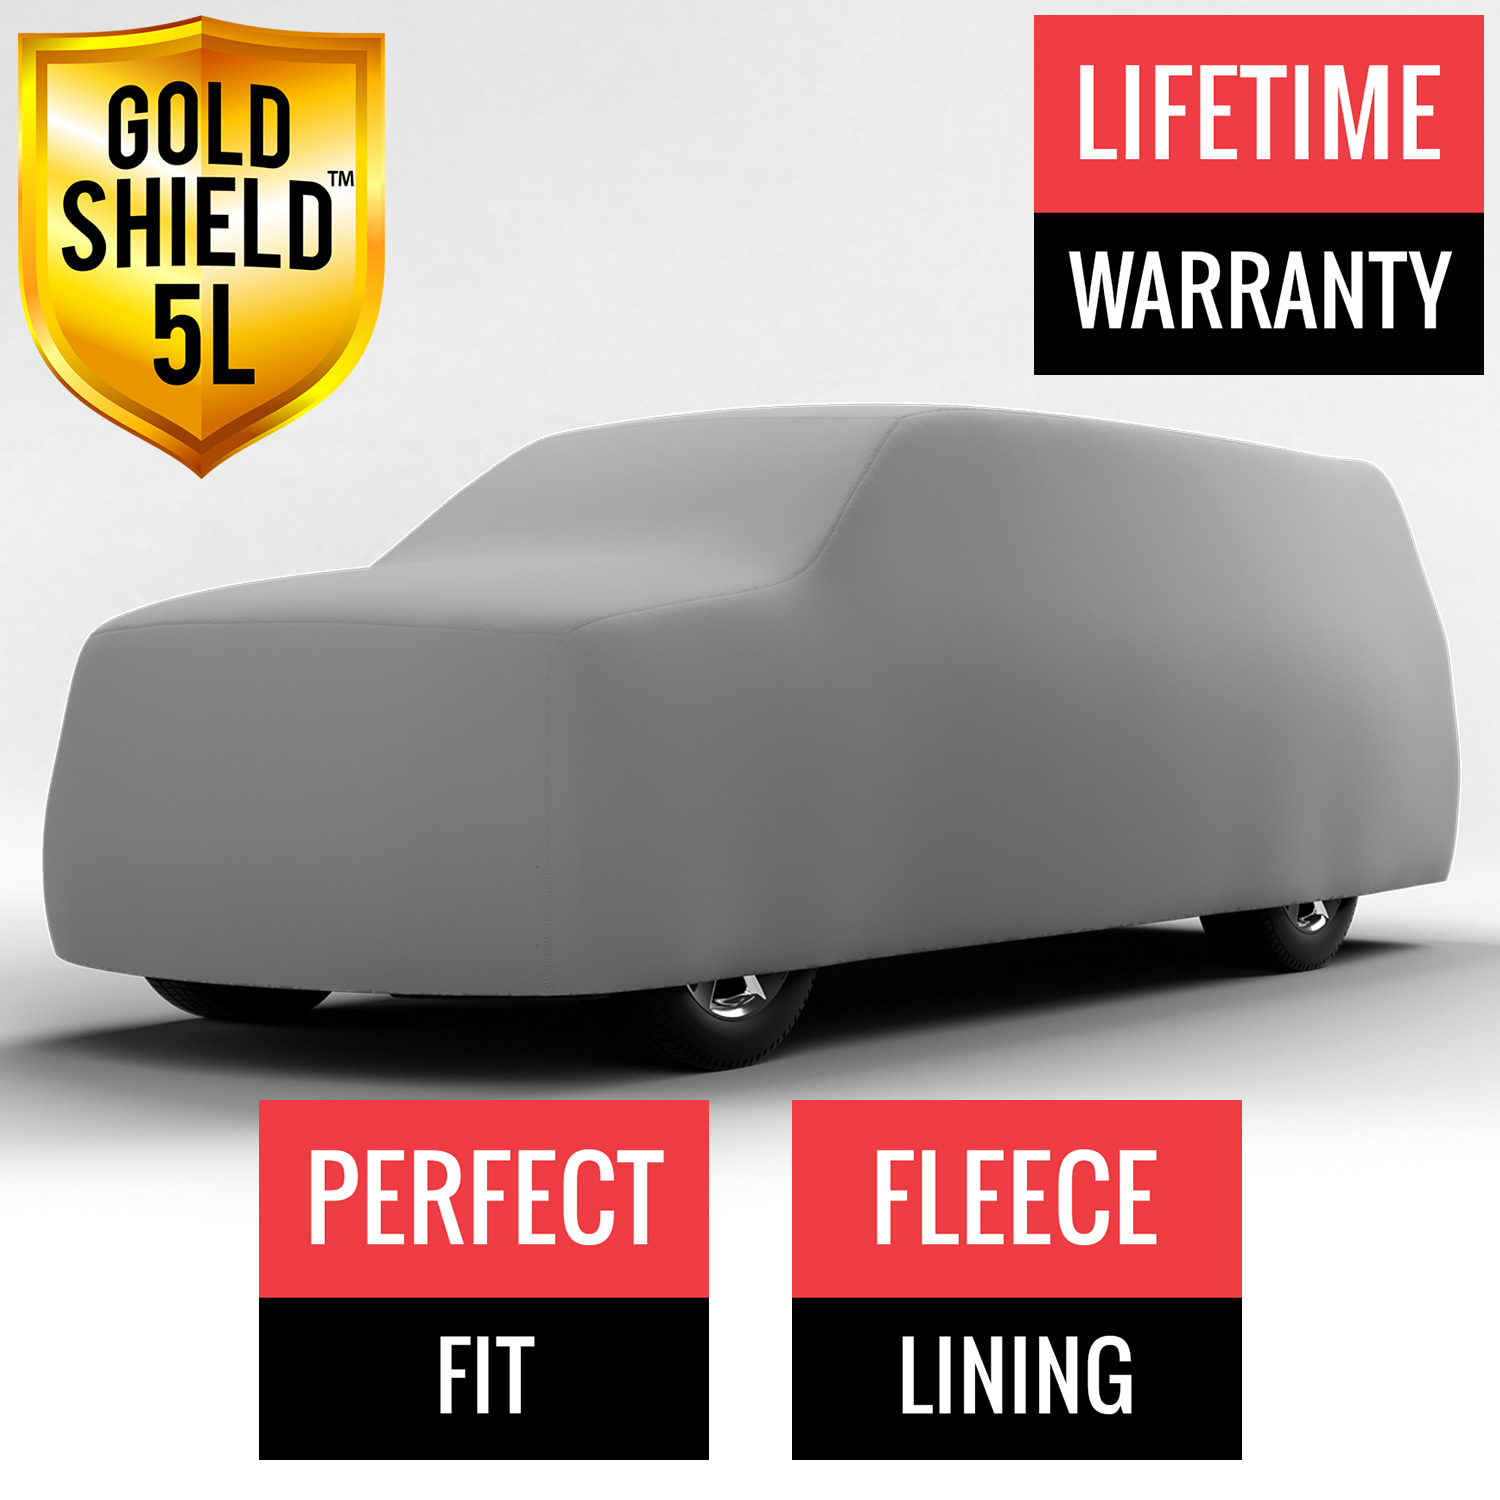 Gold Shield 5L - Car Cover for GMC Pickup 1967 Extended Cab Pickup 8.0 Feet Bed with Camper Shell